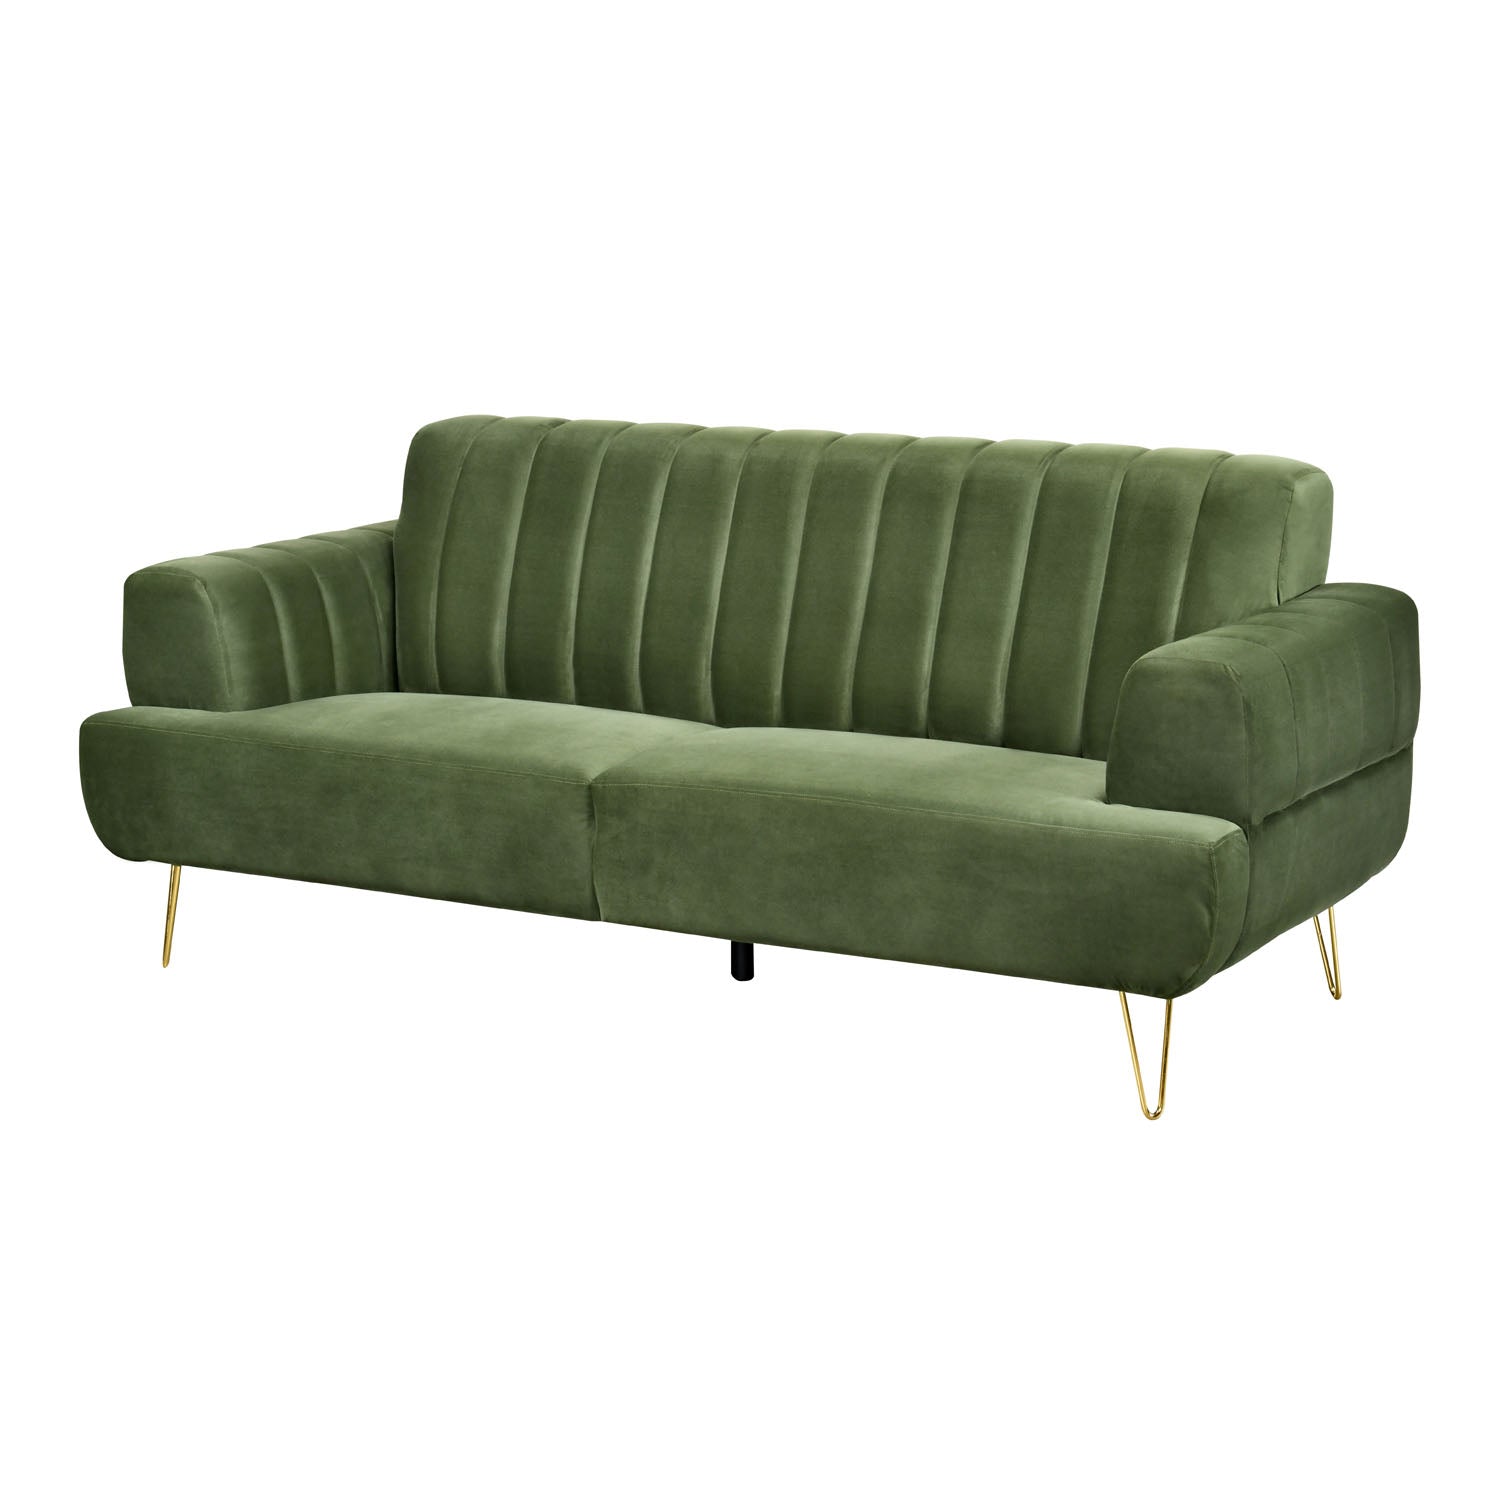 Buy Somerville 3 Seater Sofa (Olive Green)Online- At Home by Nilkamal